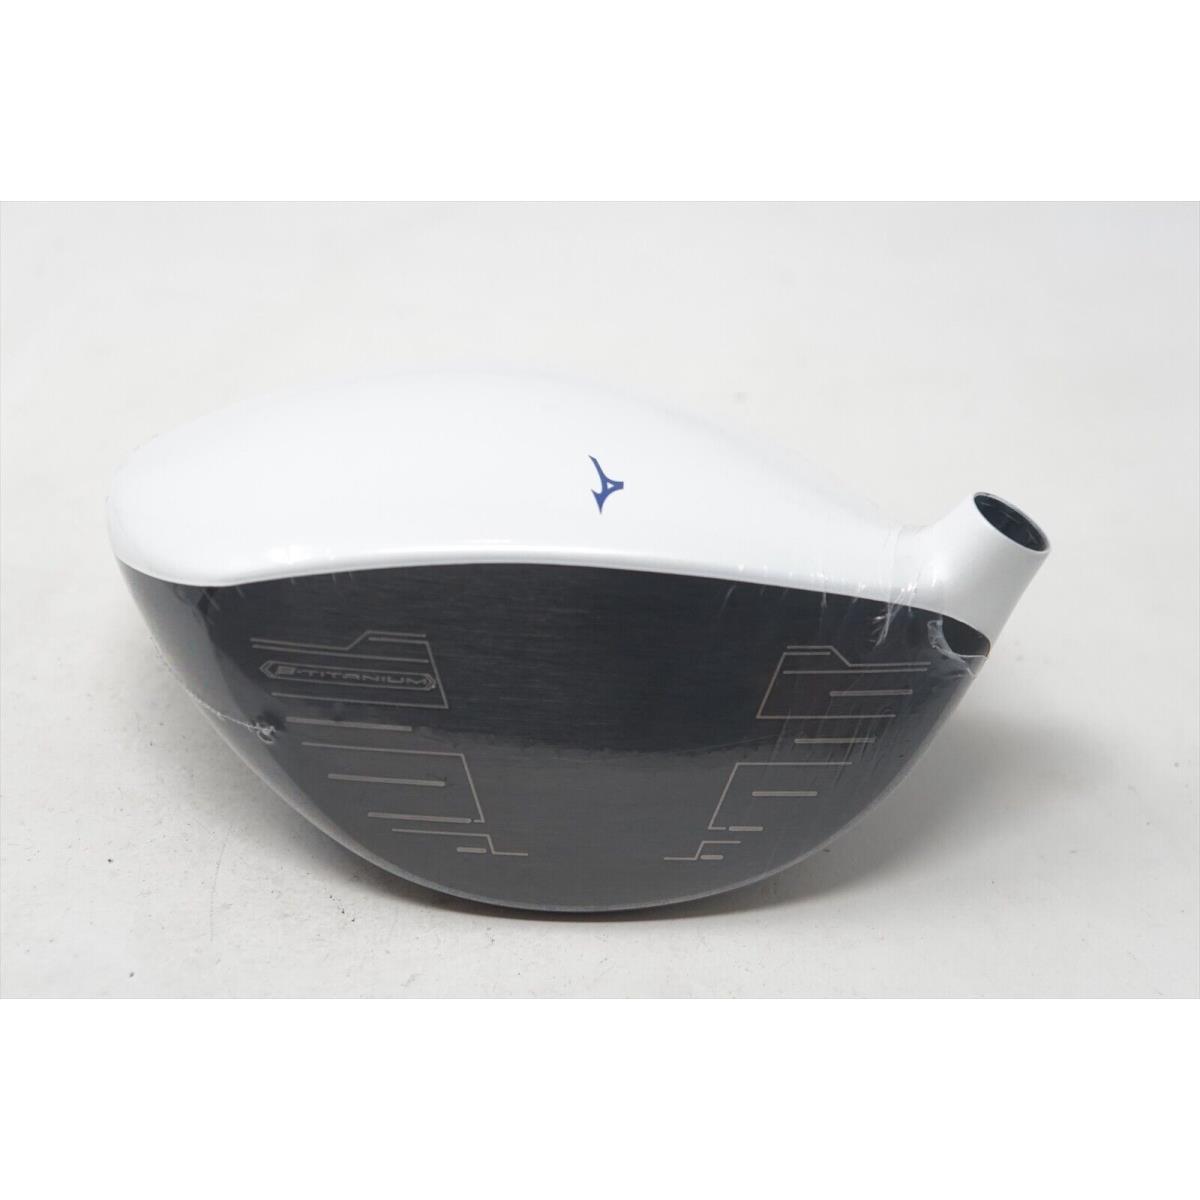 Mizuno St-z 230 10.5 White Limited Edition Driver Club Head Only 1207238